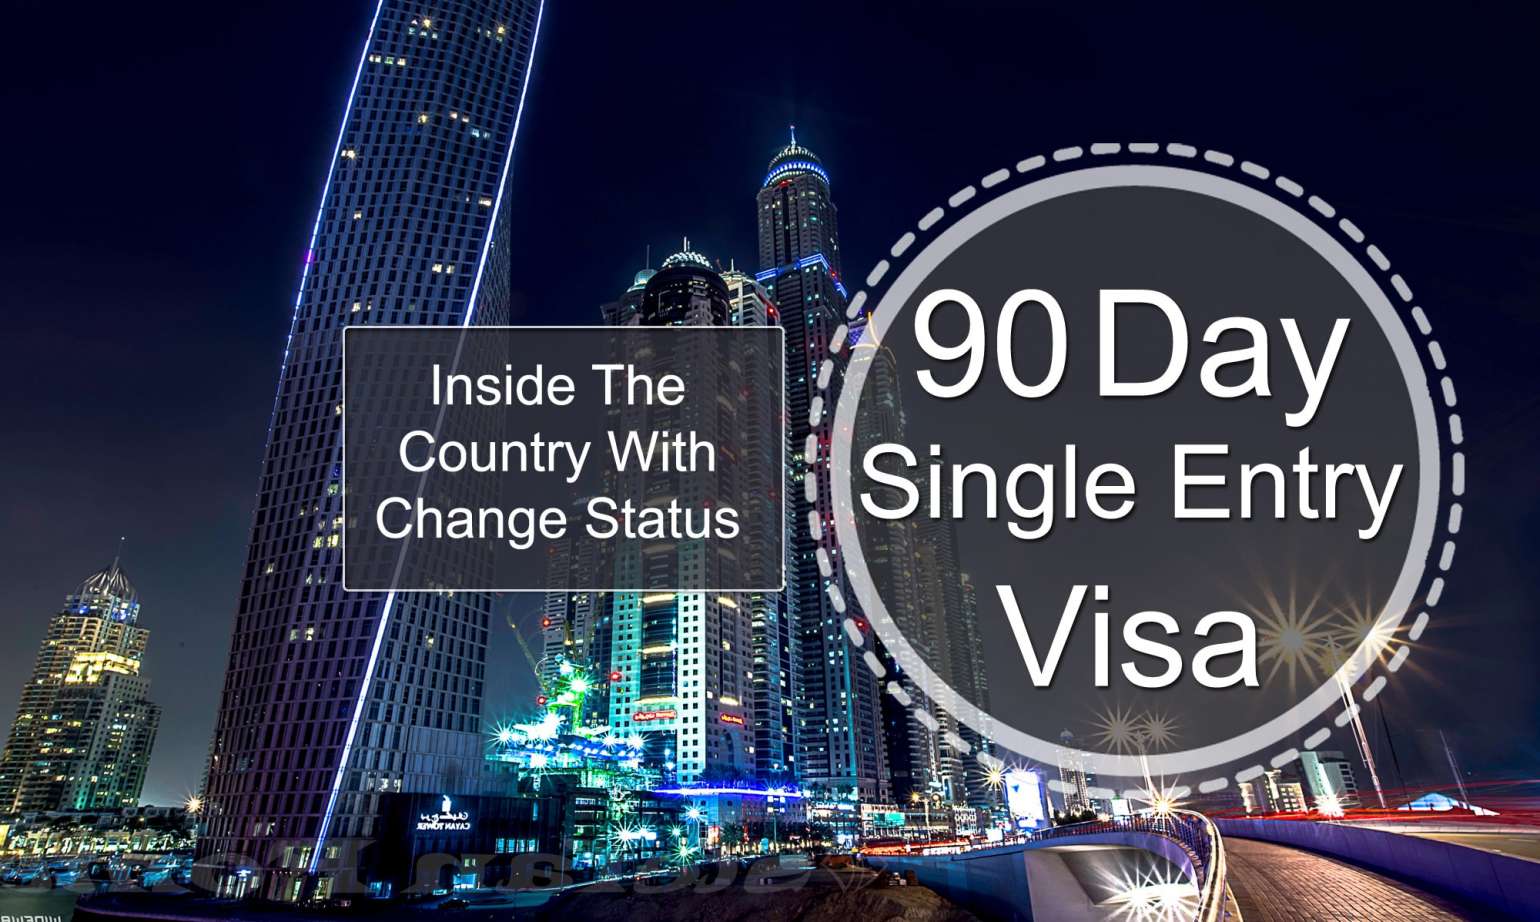 Inside the country with Change Status 90 Days Single Entry Visa